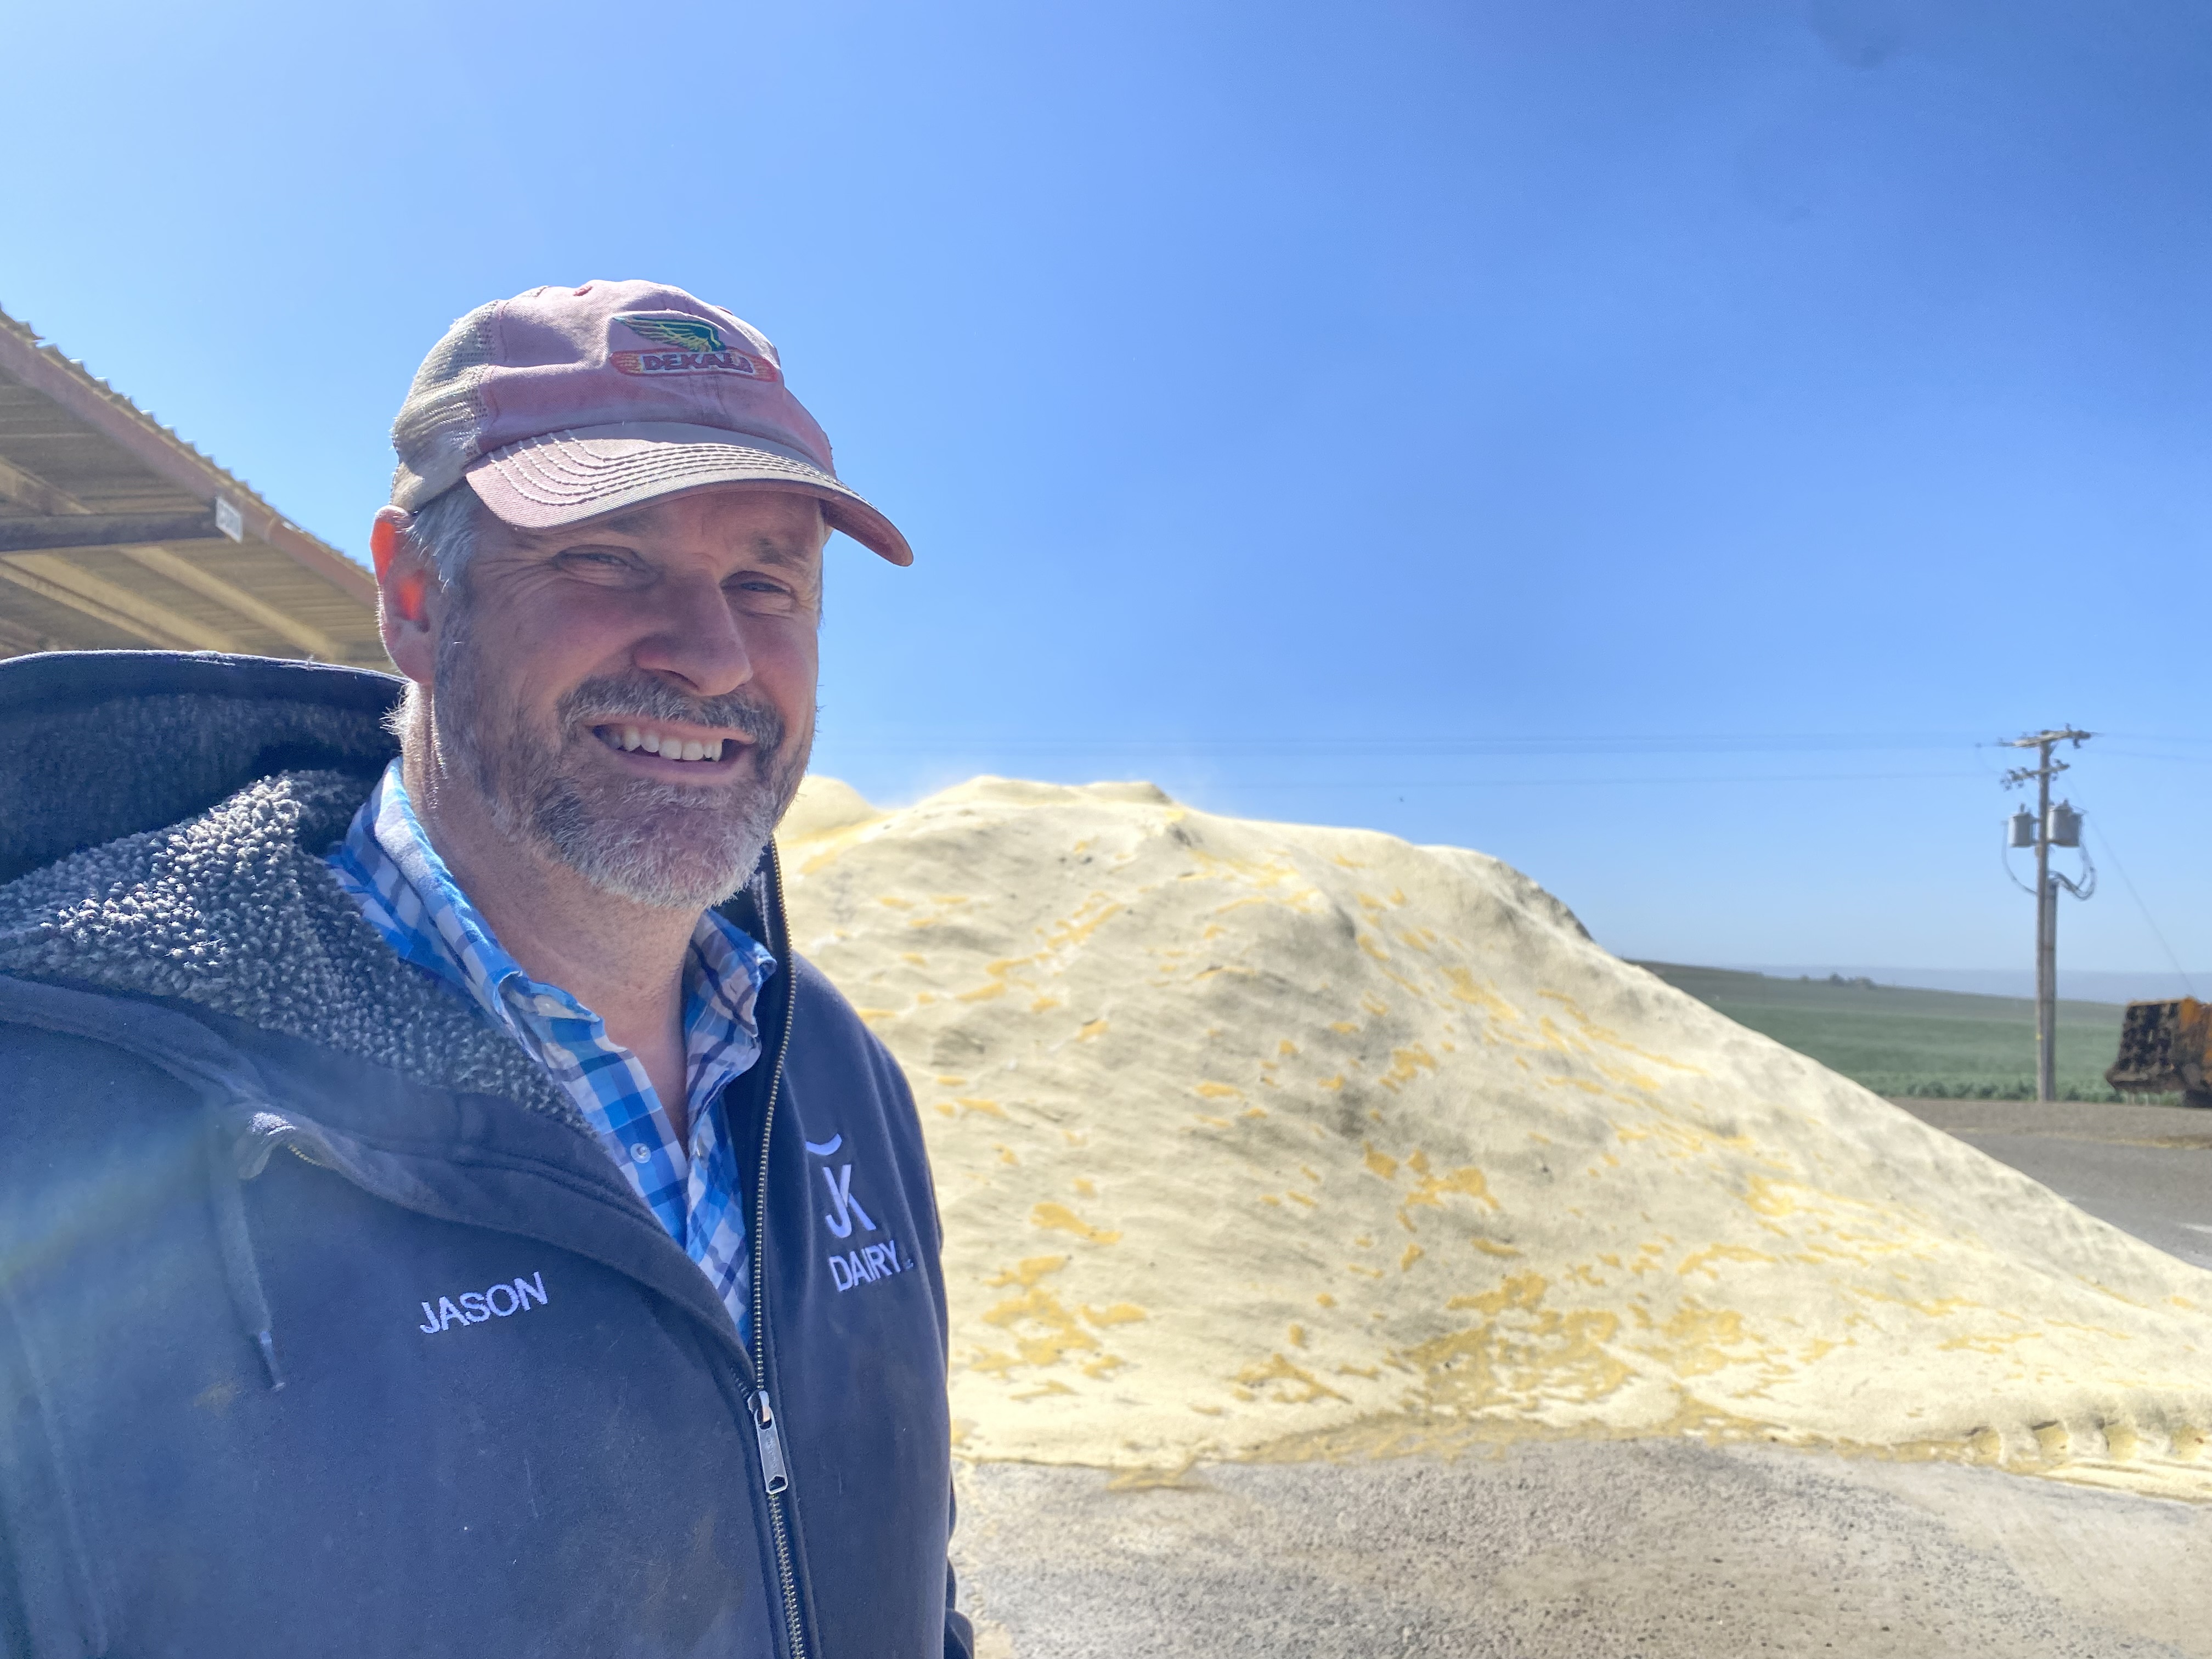 Jason Sheehan grins April 19, despite the tough conditions and water situation this year, in front of a pile of corn for his cattle, four miles east of Sunnyside, Washington.